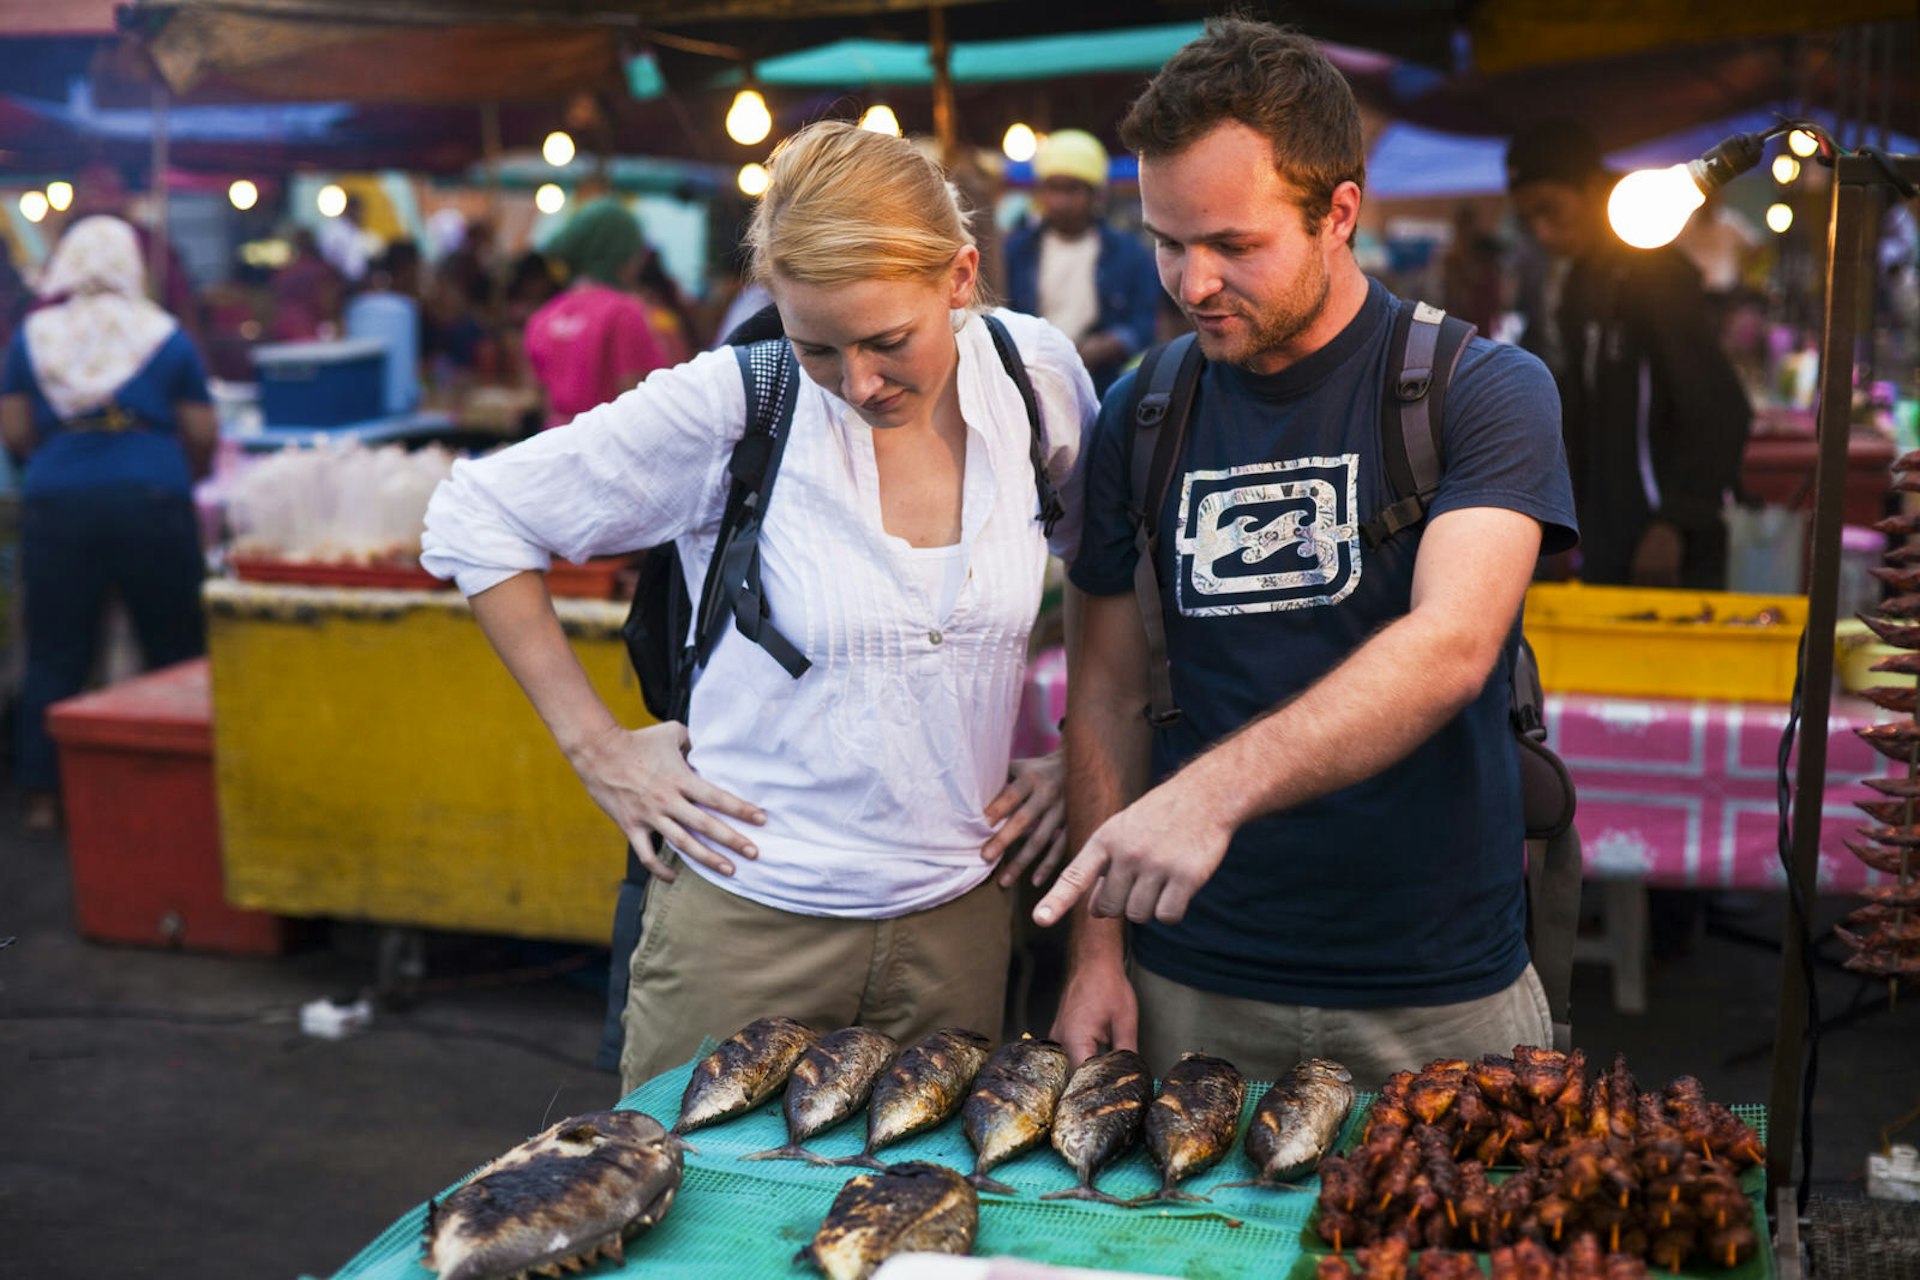 A couple inspecting some fresh fish in a street food market